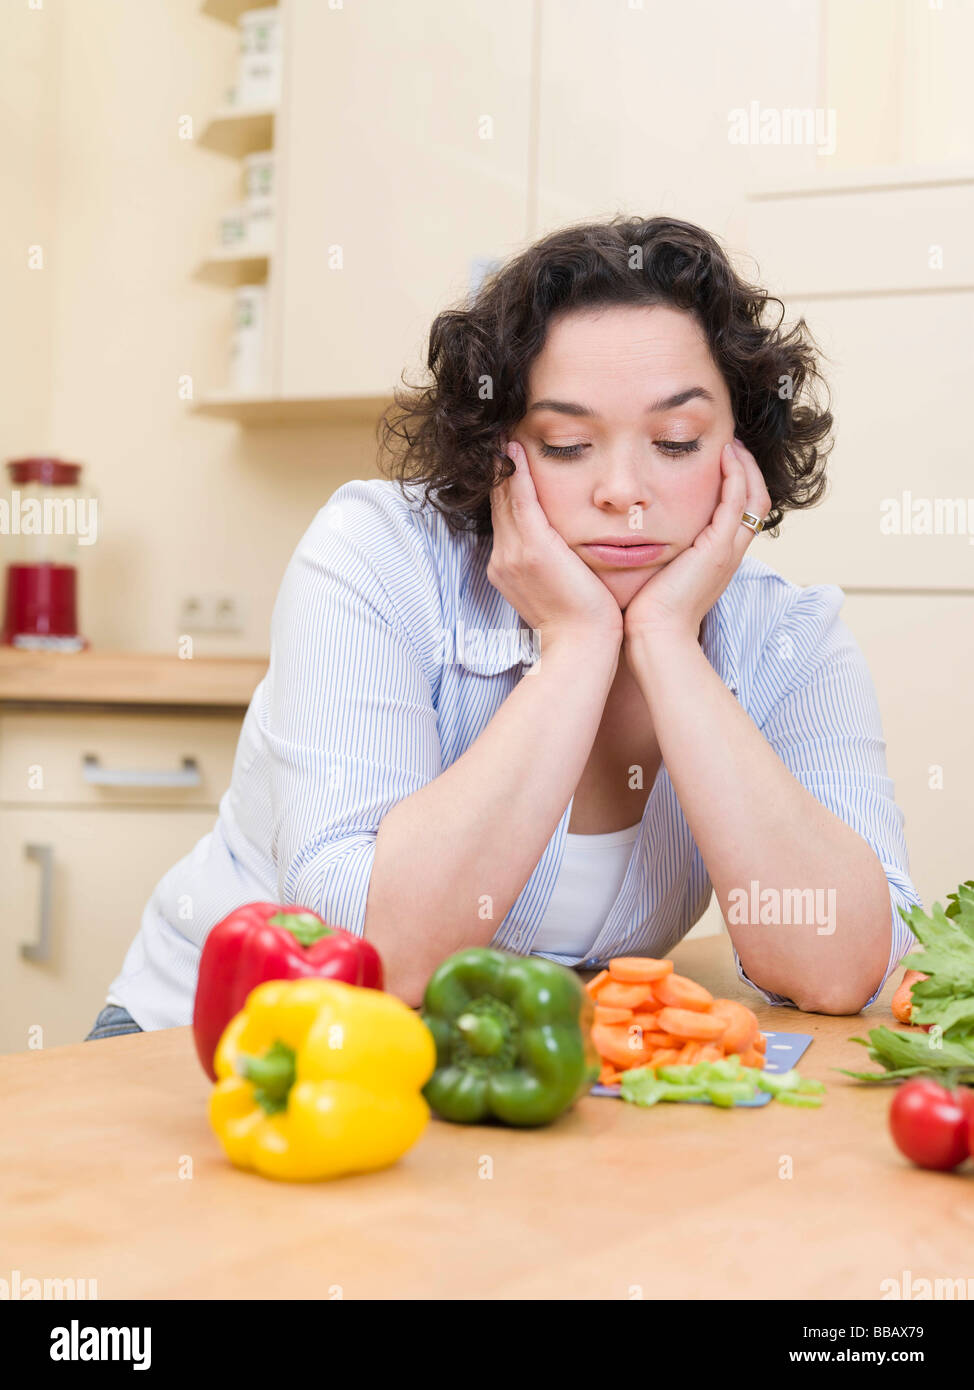 woman looking bored Stock Photo